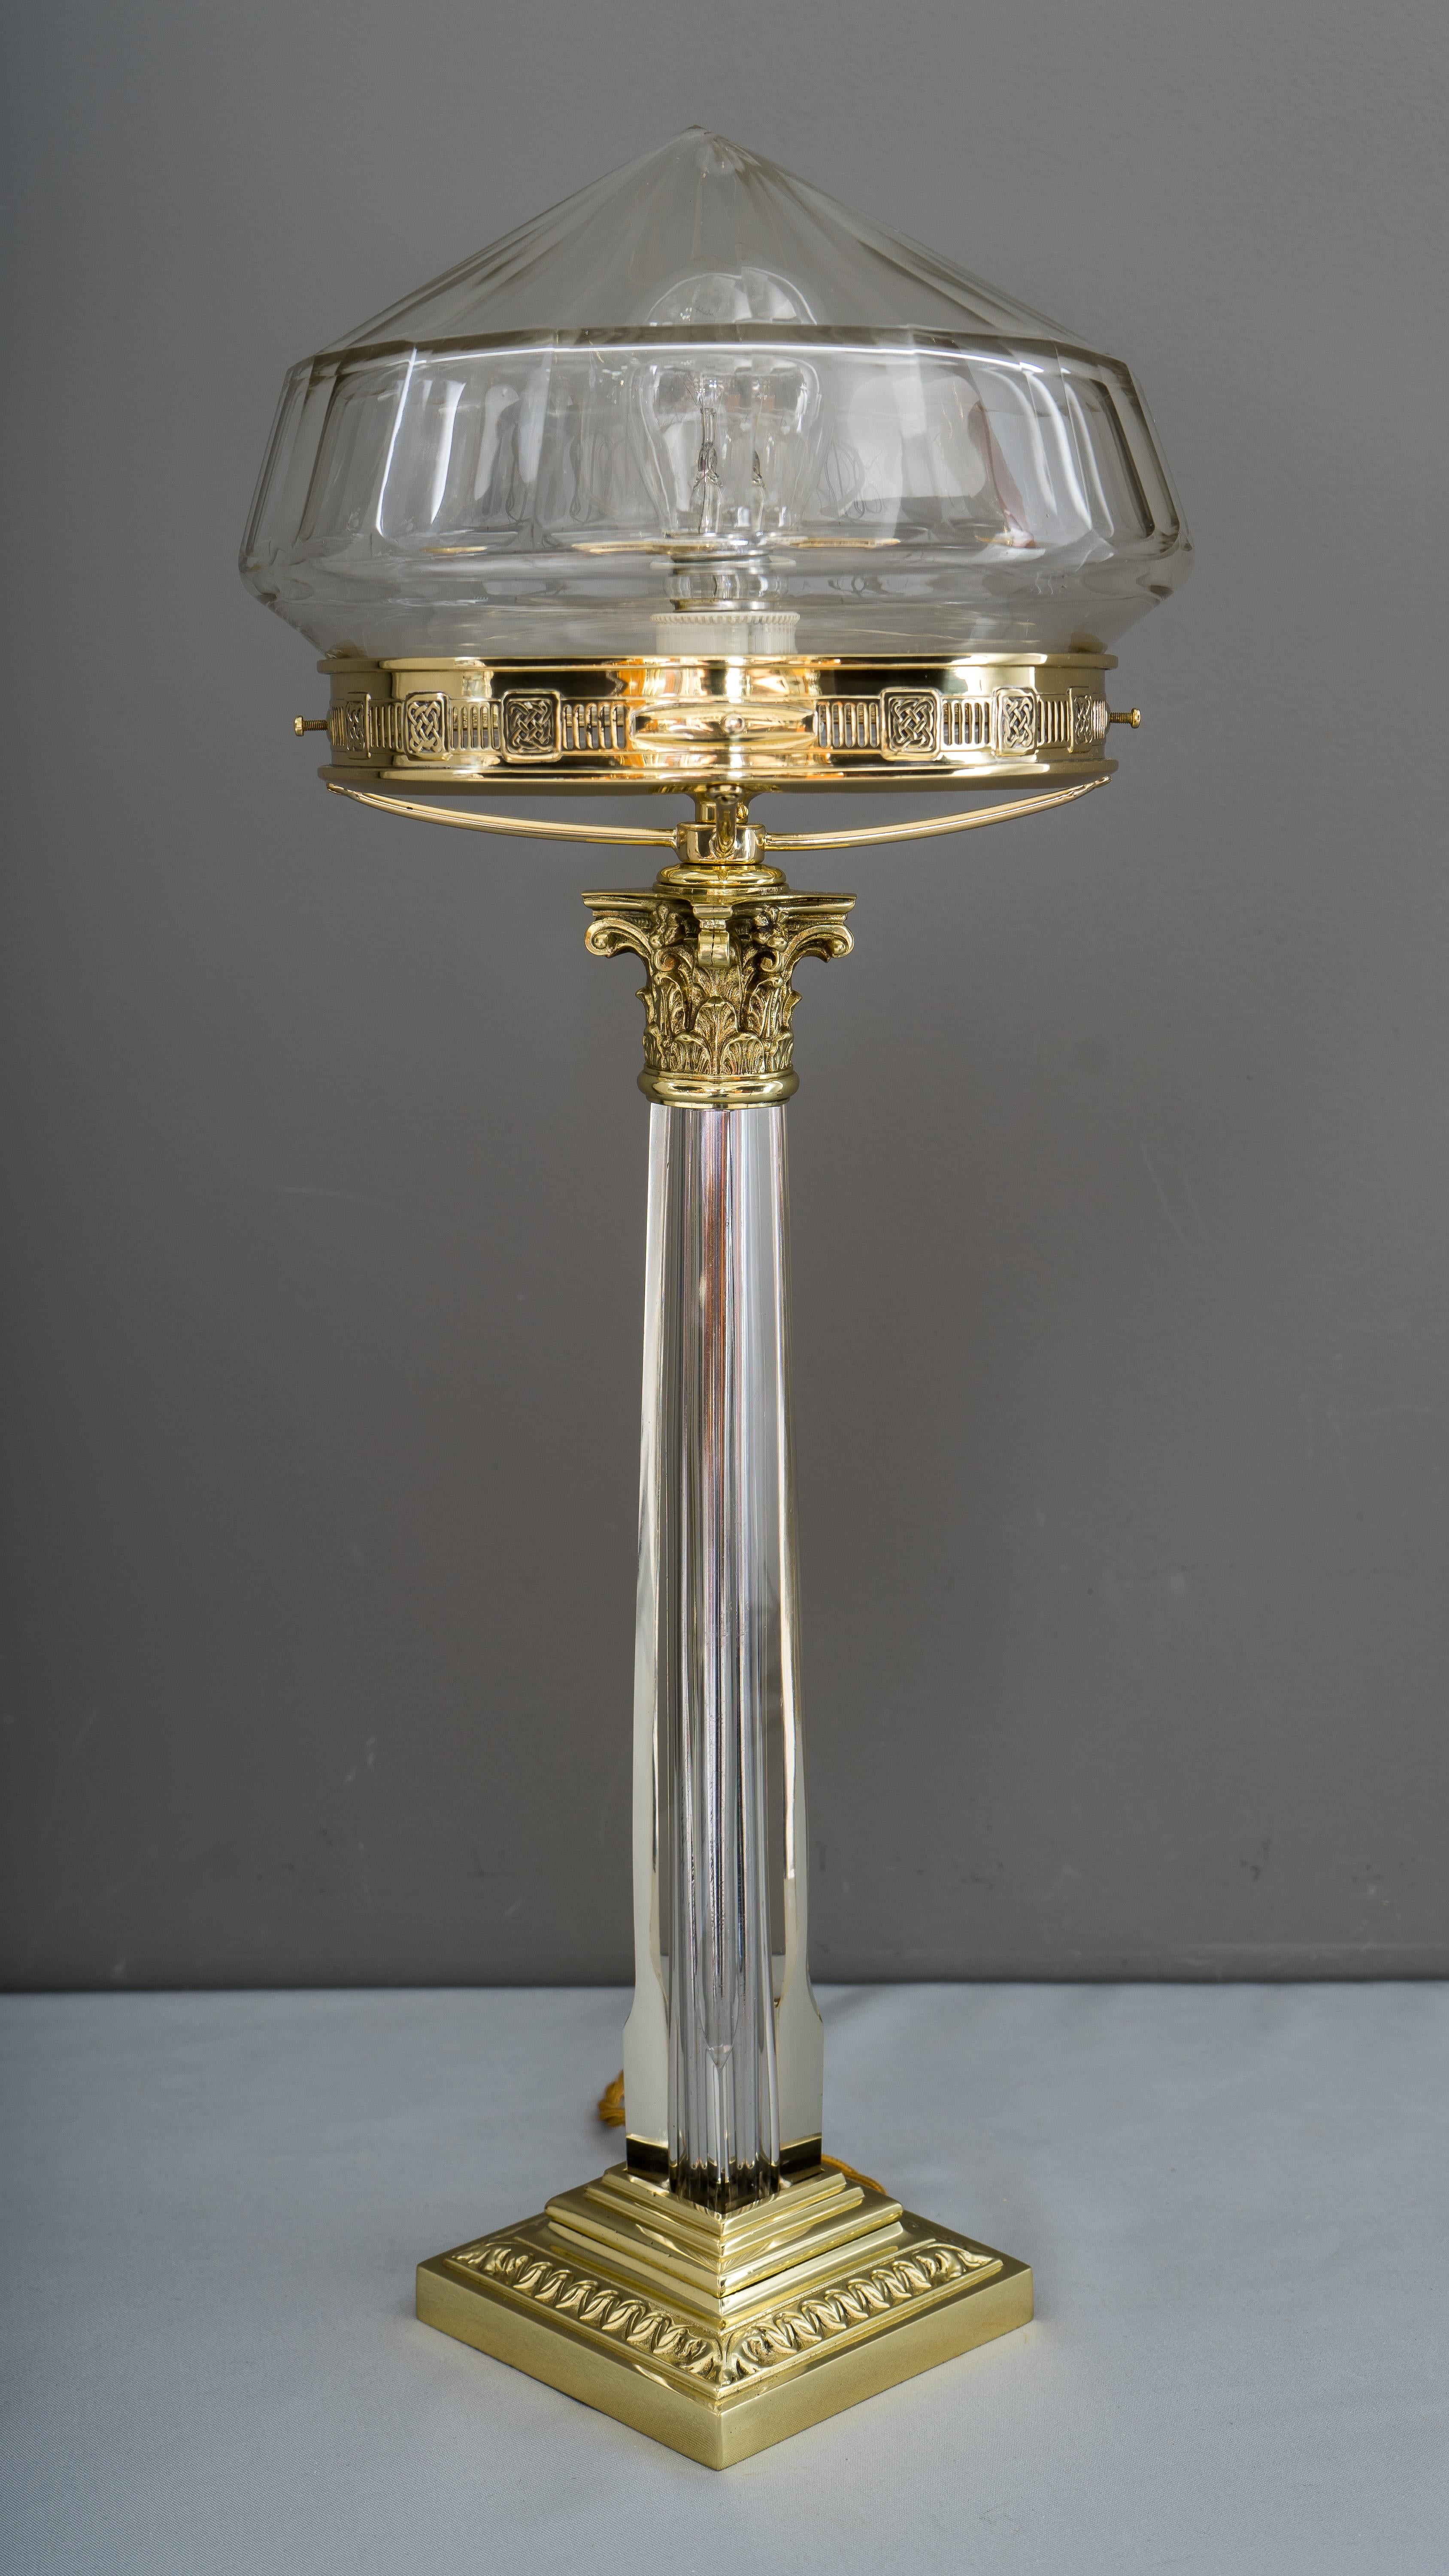 Big jugendstil table lamp with cut glass shade, Vienna, 1908s
Polished and stove enamelled
Glass handle.